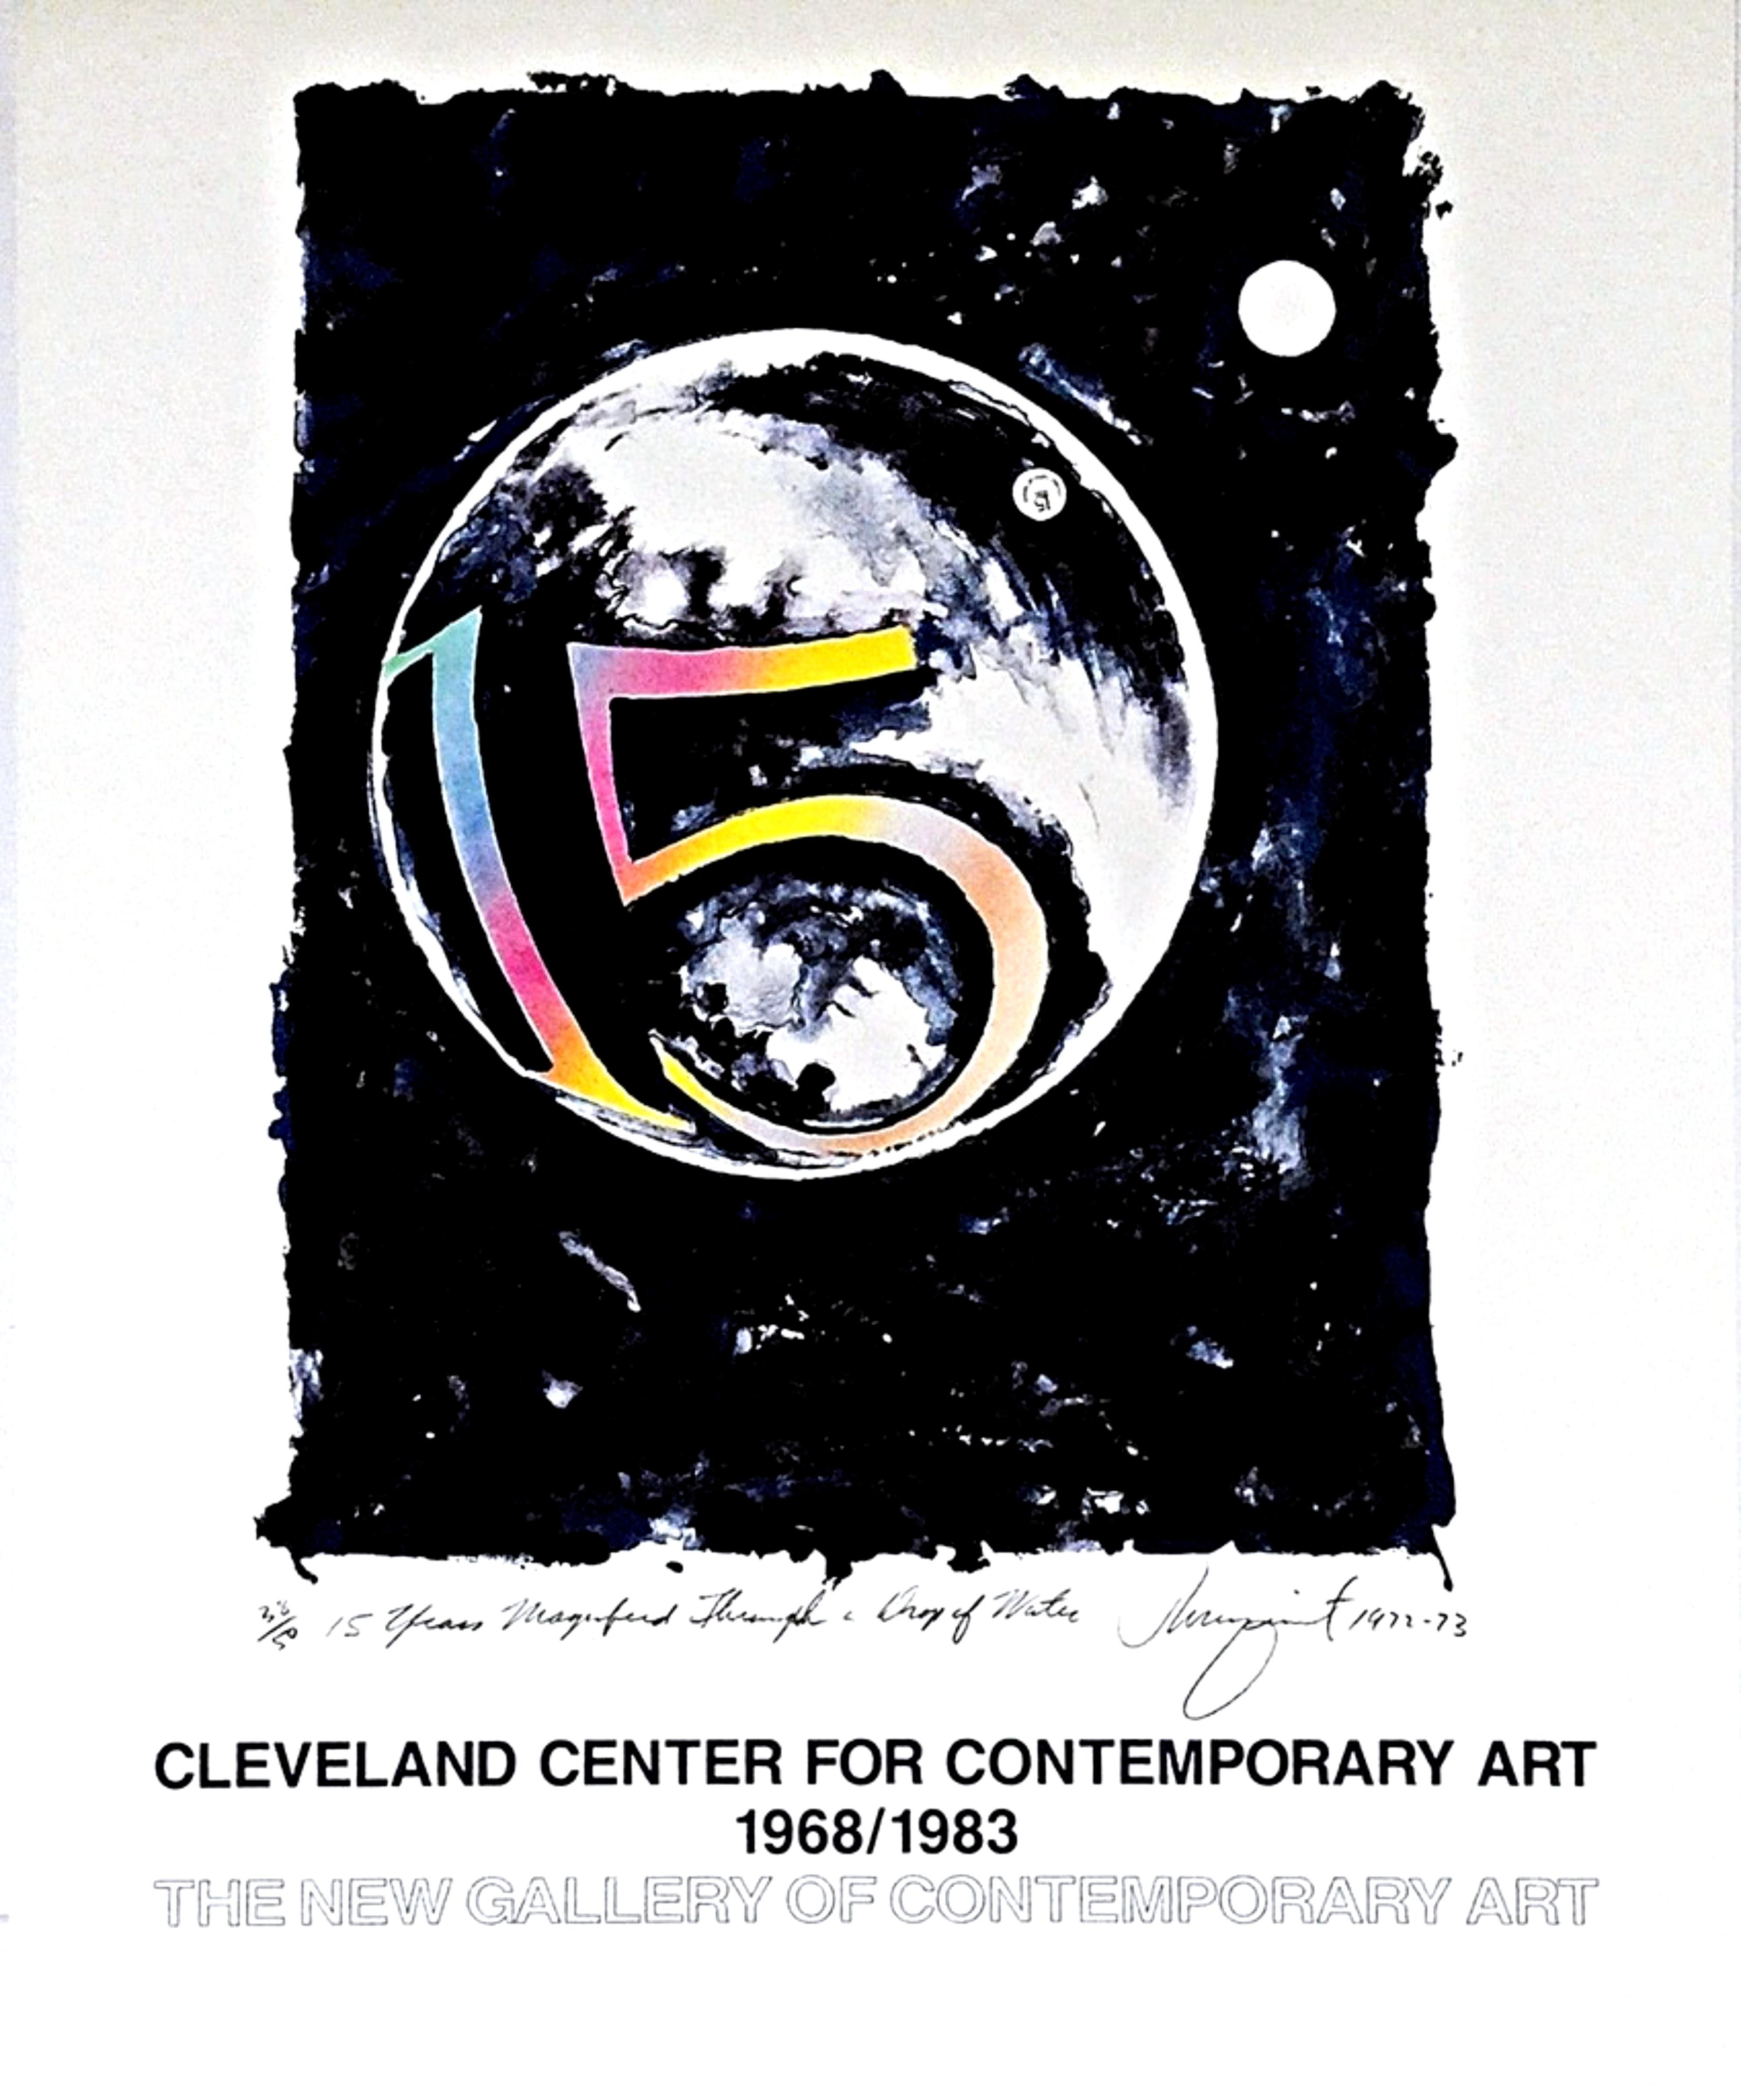 James Rosenquist
Cleveland Center for Contemporary Art 1968-1983
Offset Lithograph Poster on White Wove Paper
Plate (printed) signature
Limited Edition of 500 (unnumbered)
Unframed
A great decorative poster from the major retrospective with cool